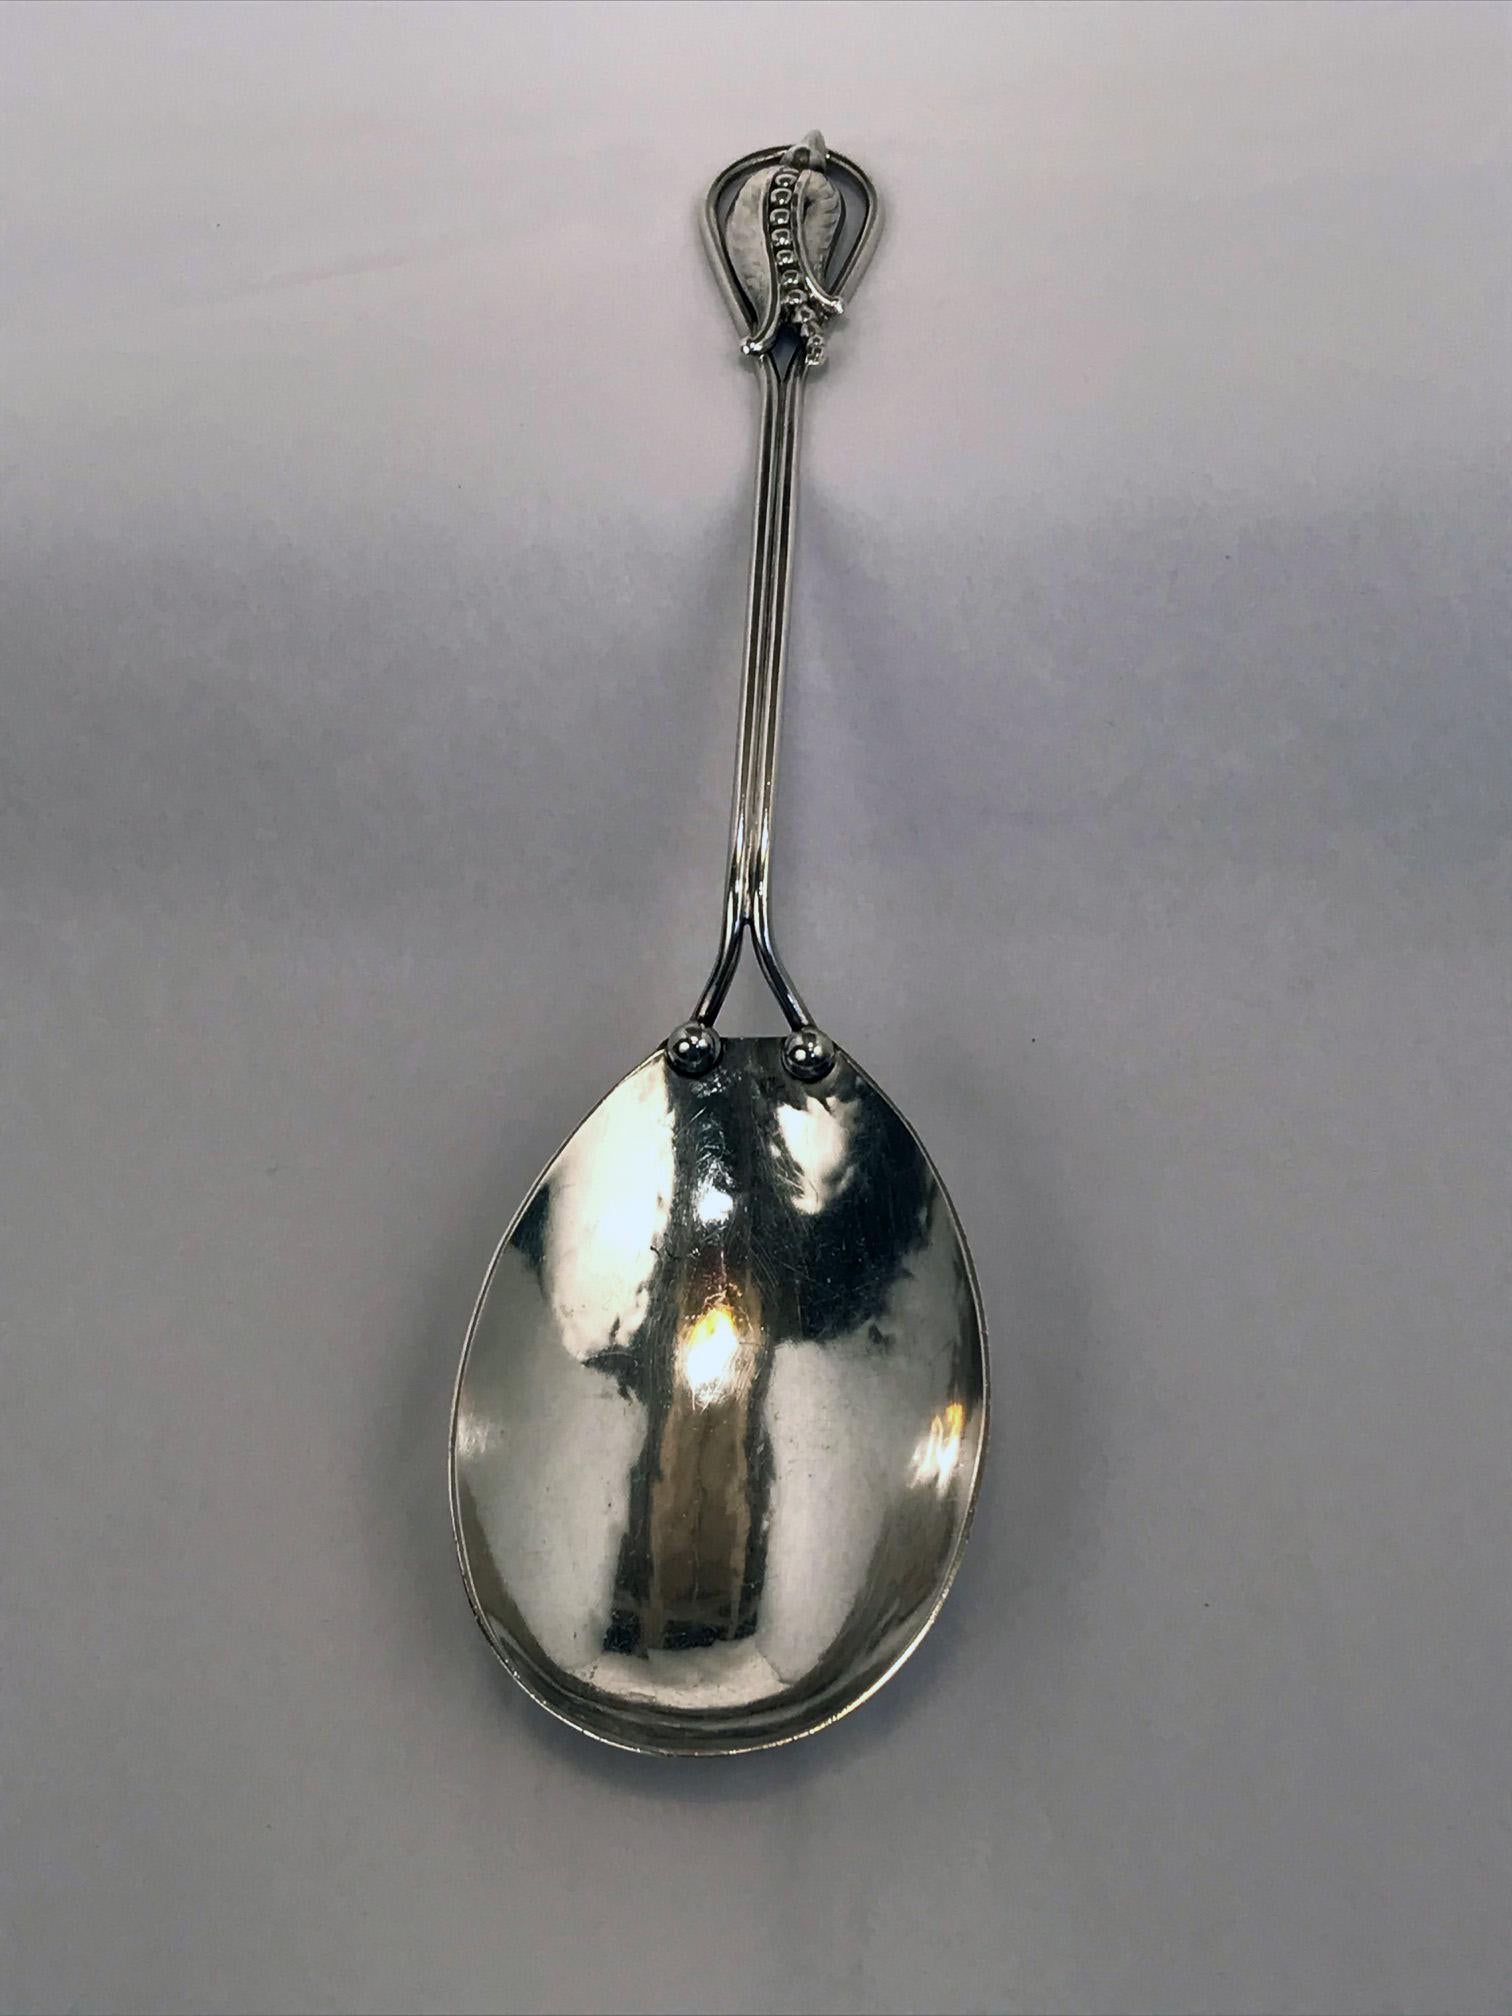 A set consisting of a salad serving spoon and fork in sterling silver by Carl Poul Petersen in his renowned blossom corn flower pattern.